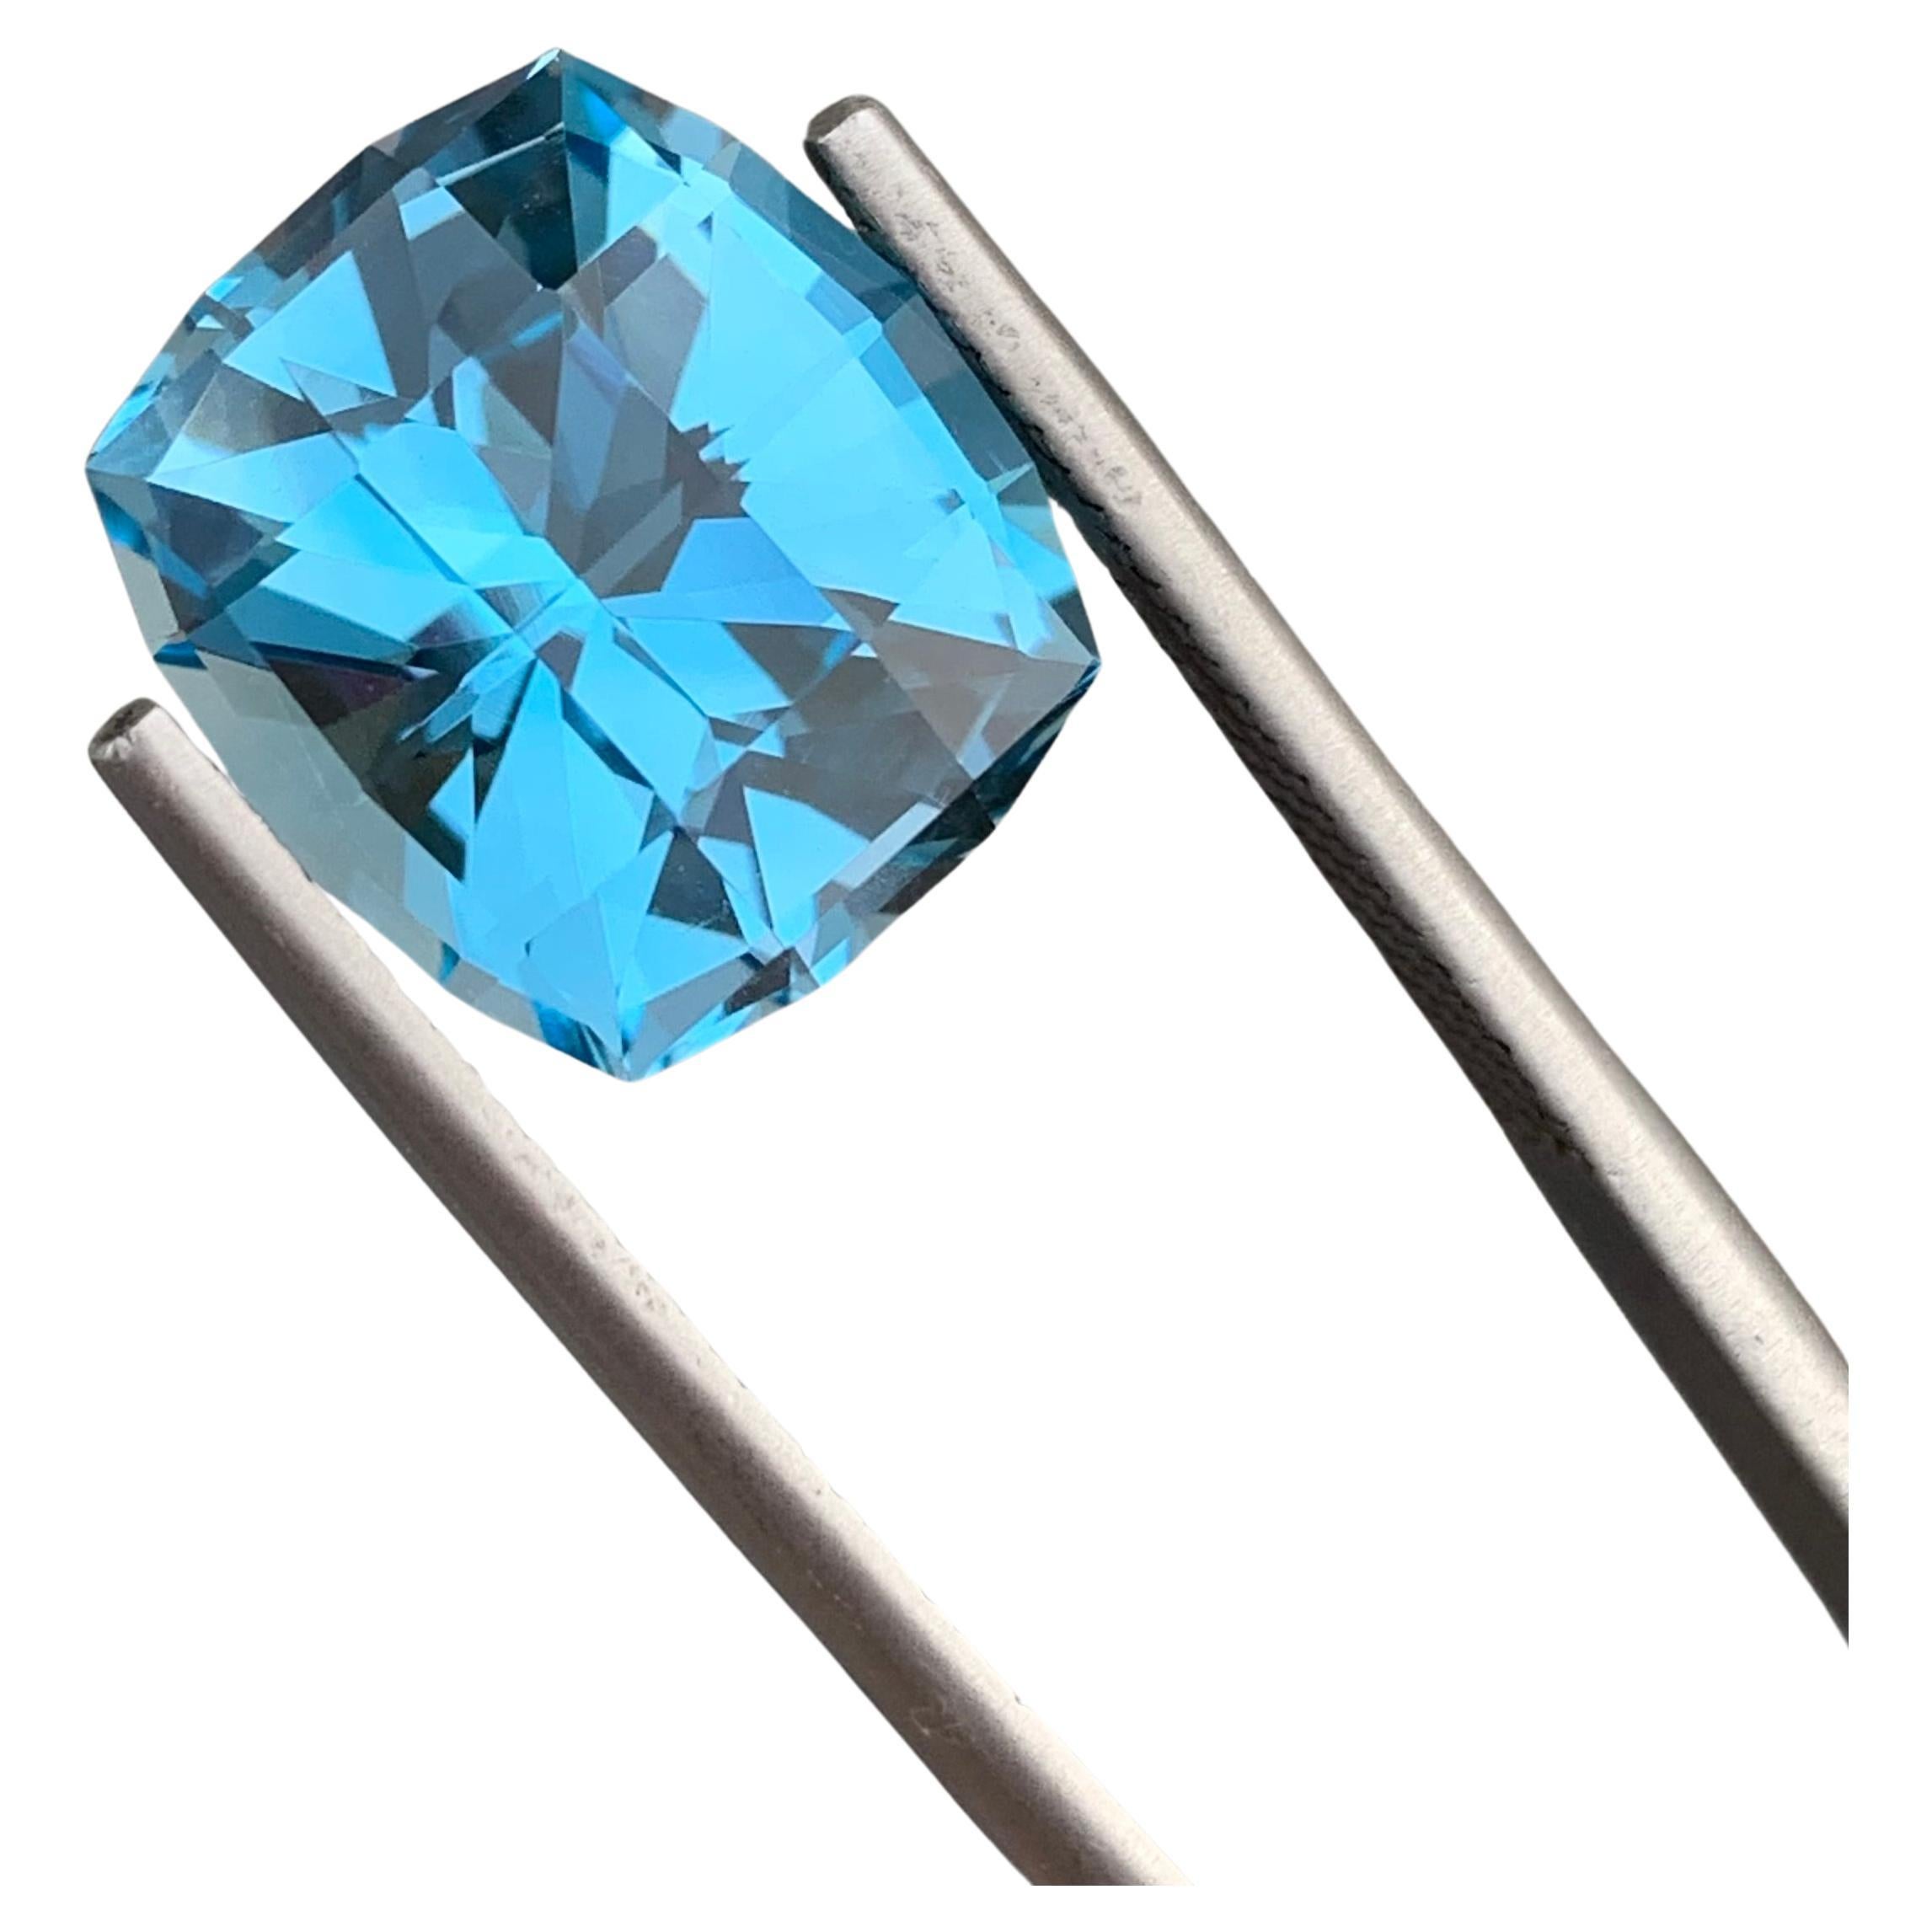 Loose Blue Topaz
Weight: 12.15 Carats
Dimensions: 14 x 12.8 x 9.2 Mm
Origin: Brazil
Shape: Can
Color: Blue
Certificate: On Demand

Benefits Of Wearing Blue Topaz Stone:
It helps to improve communication and self-expression.
It provides inner peace